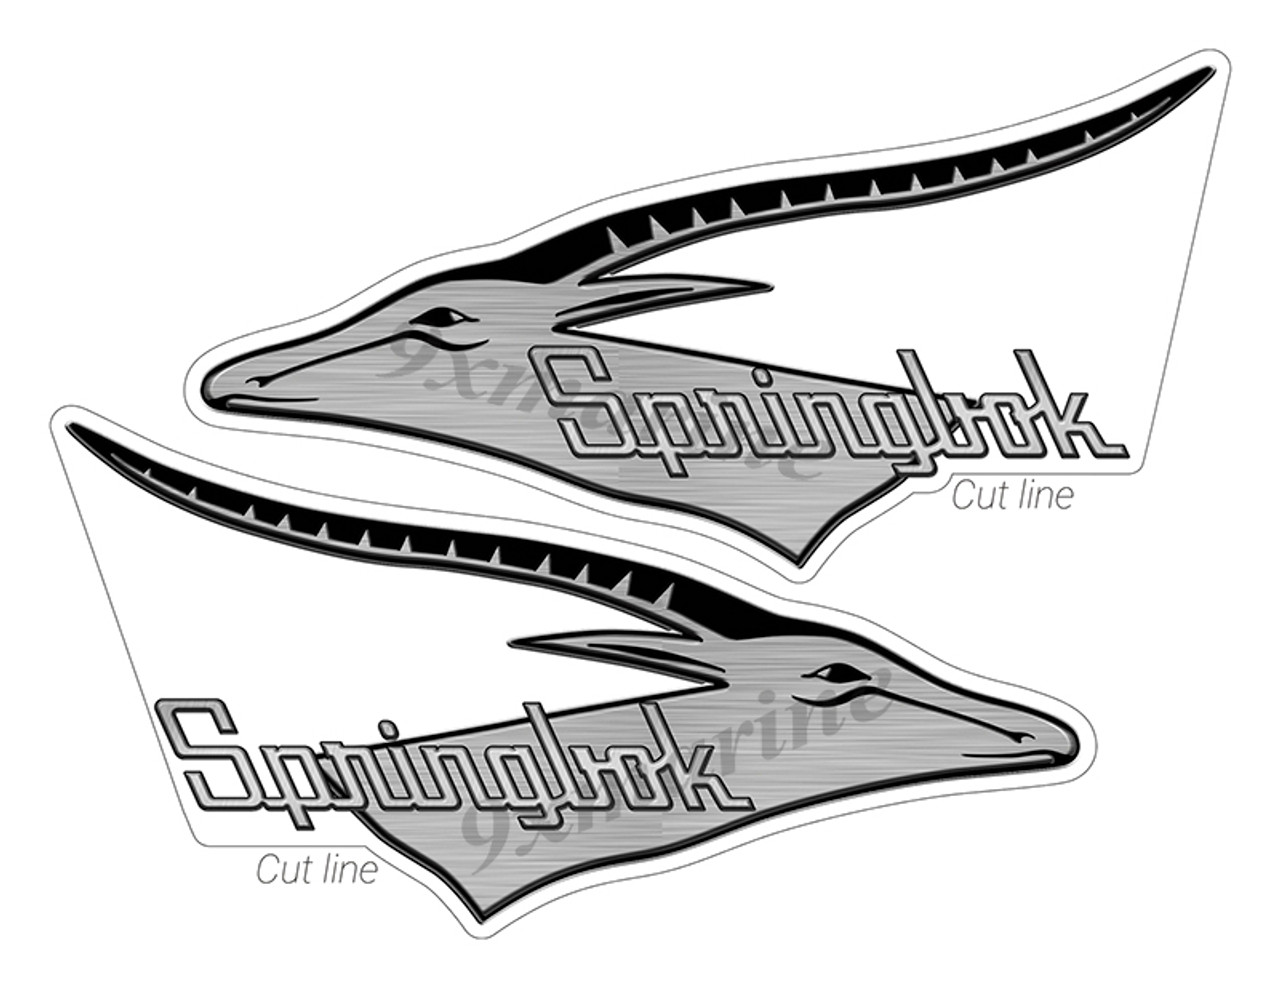 Springbok boat stickers. Replace your boat maker stickers